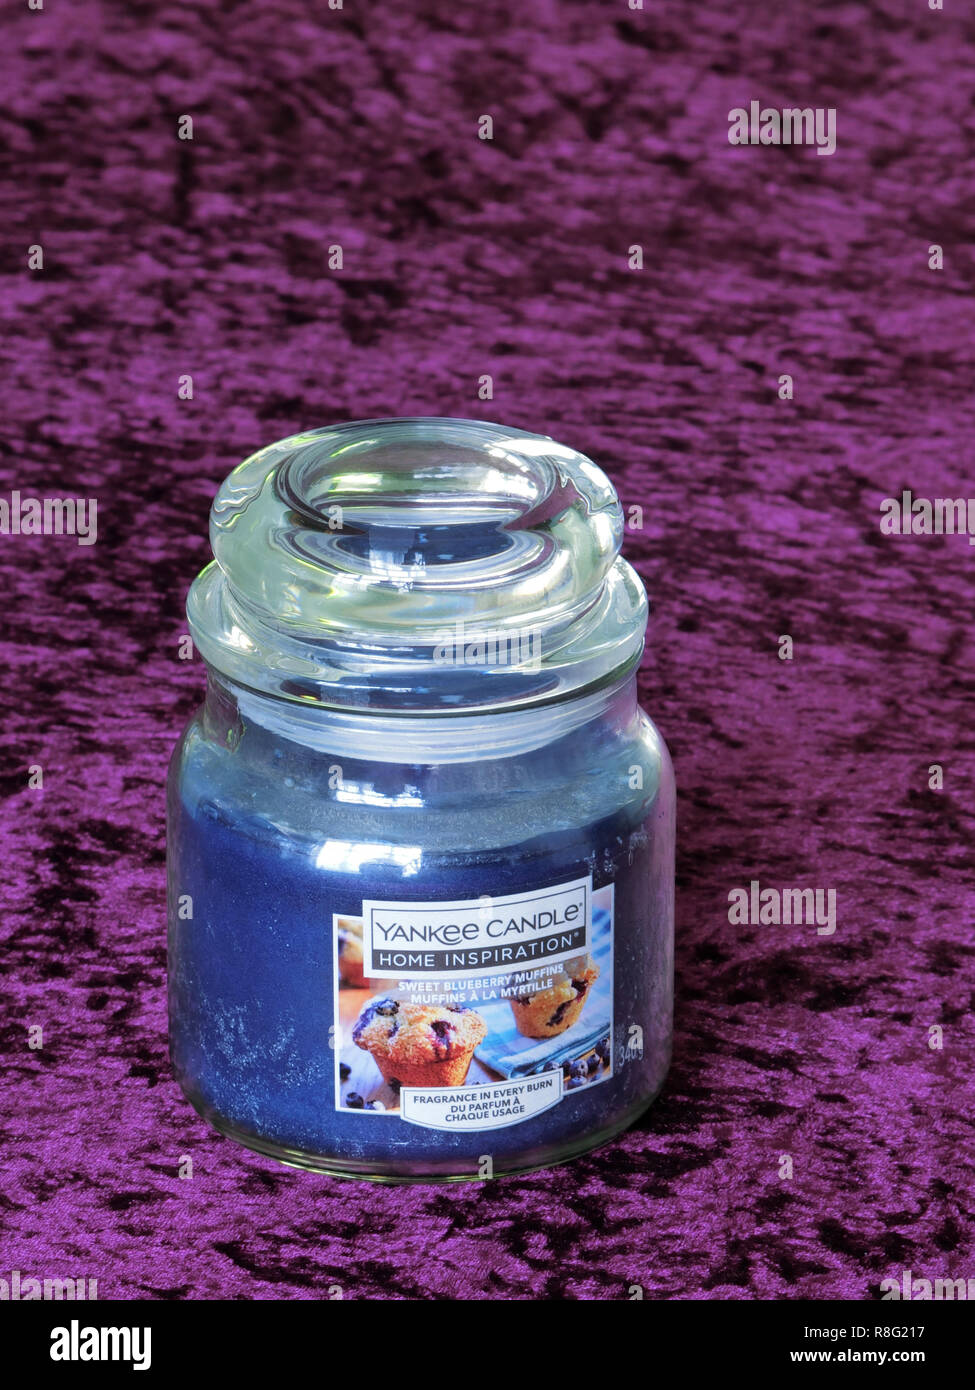 Yankee Candle Home Inspiration Fragranced, Scented or Perfumed Sweet Blueberry Muffins Candle Stock Photo